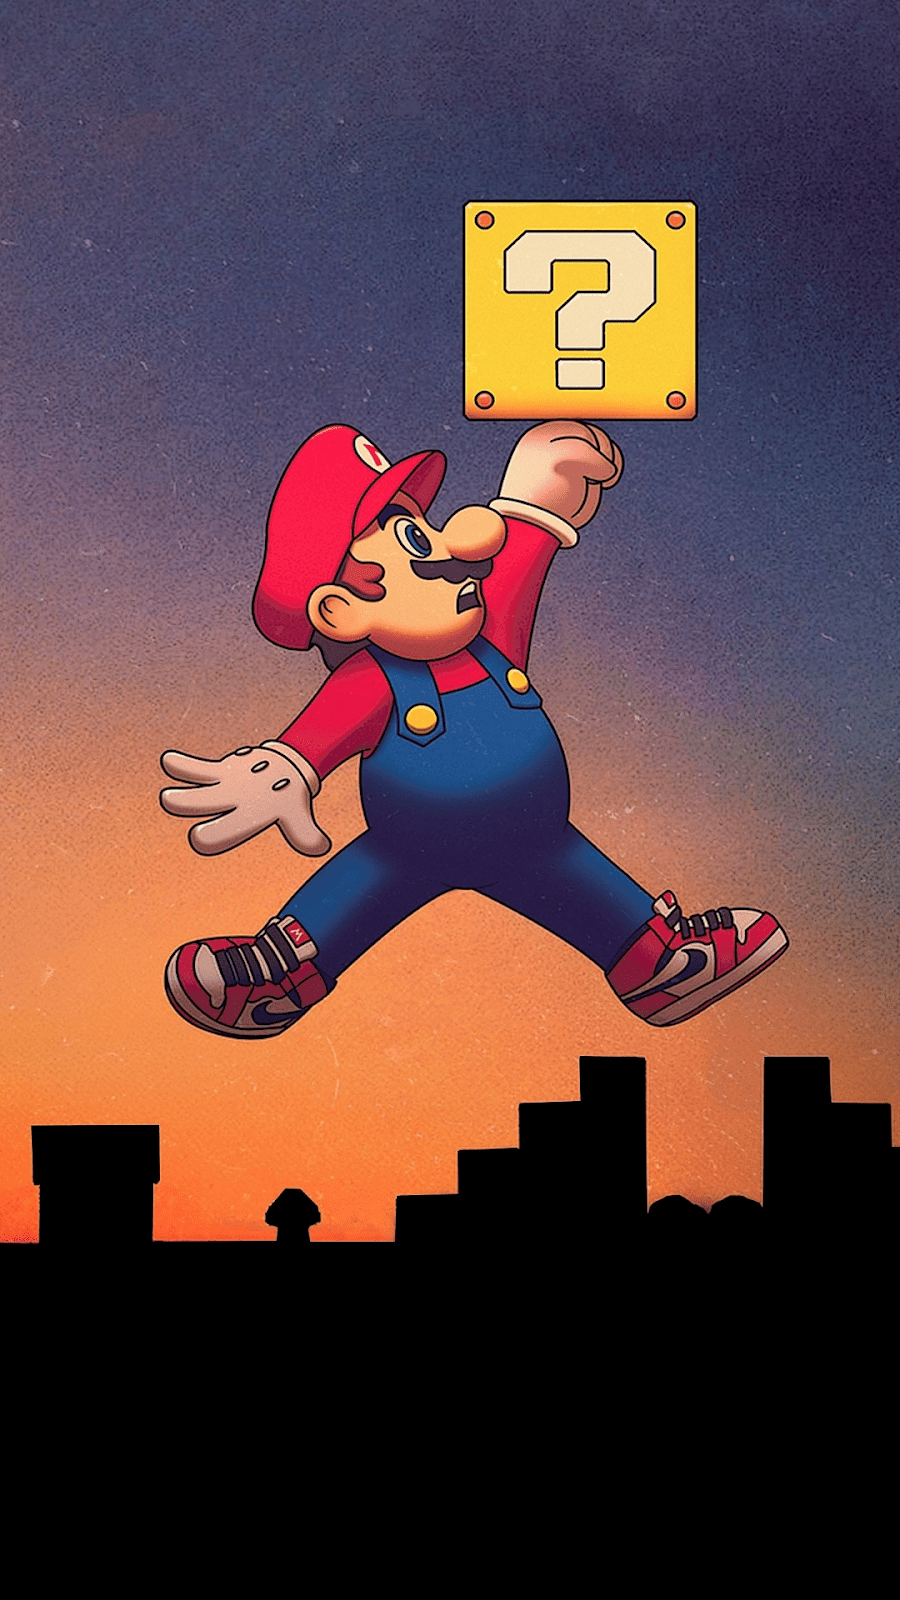 Mario jumping over a city with a question block - Super Mario